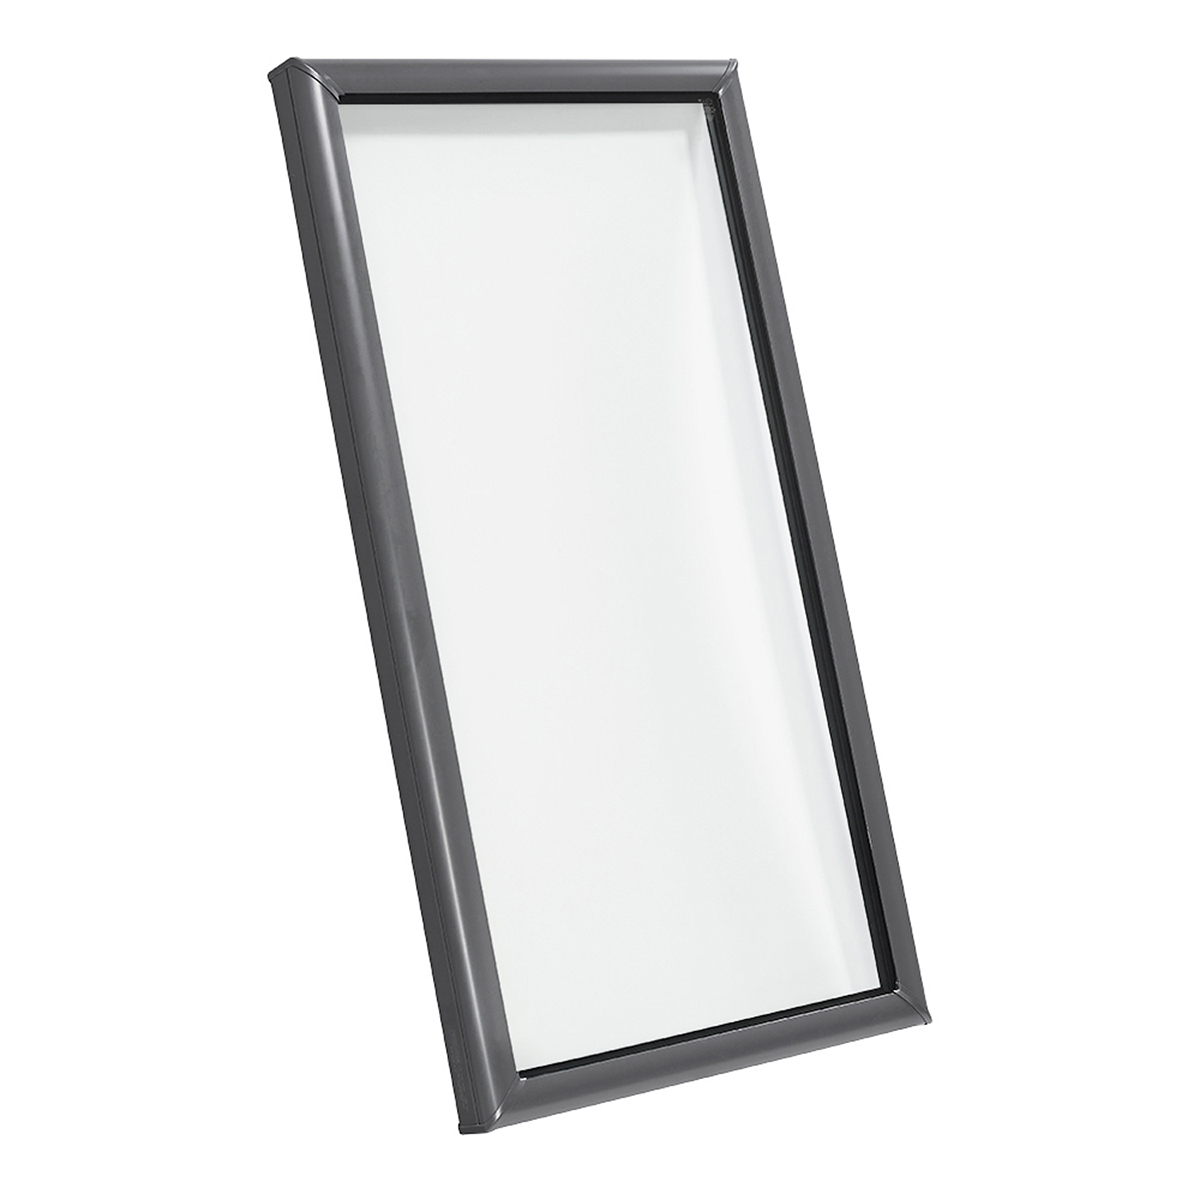 Fixed Curb-Mount Skylight with Laminated Low-E3 Glass - 34-1/2 in. x 46-1/2 in. - FCM 3446